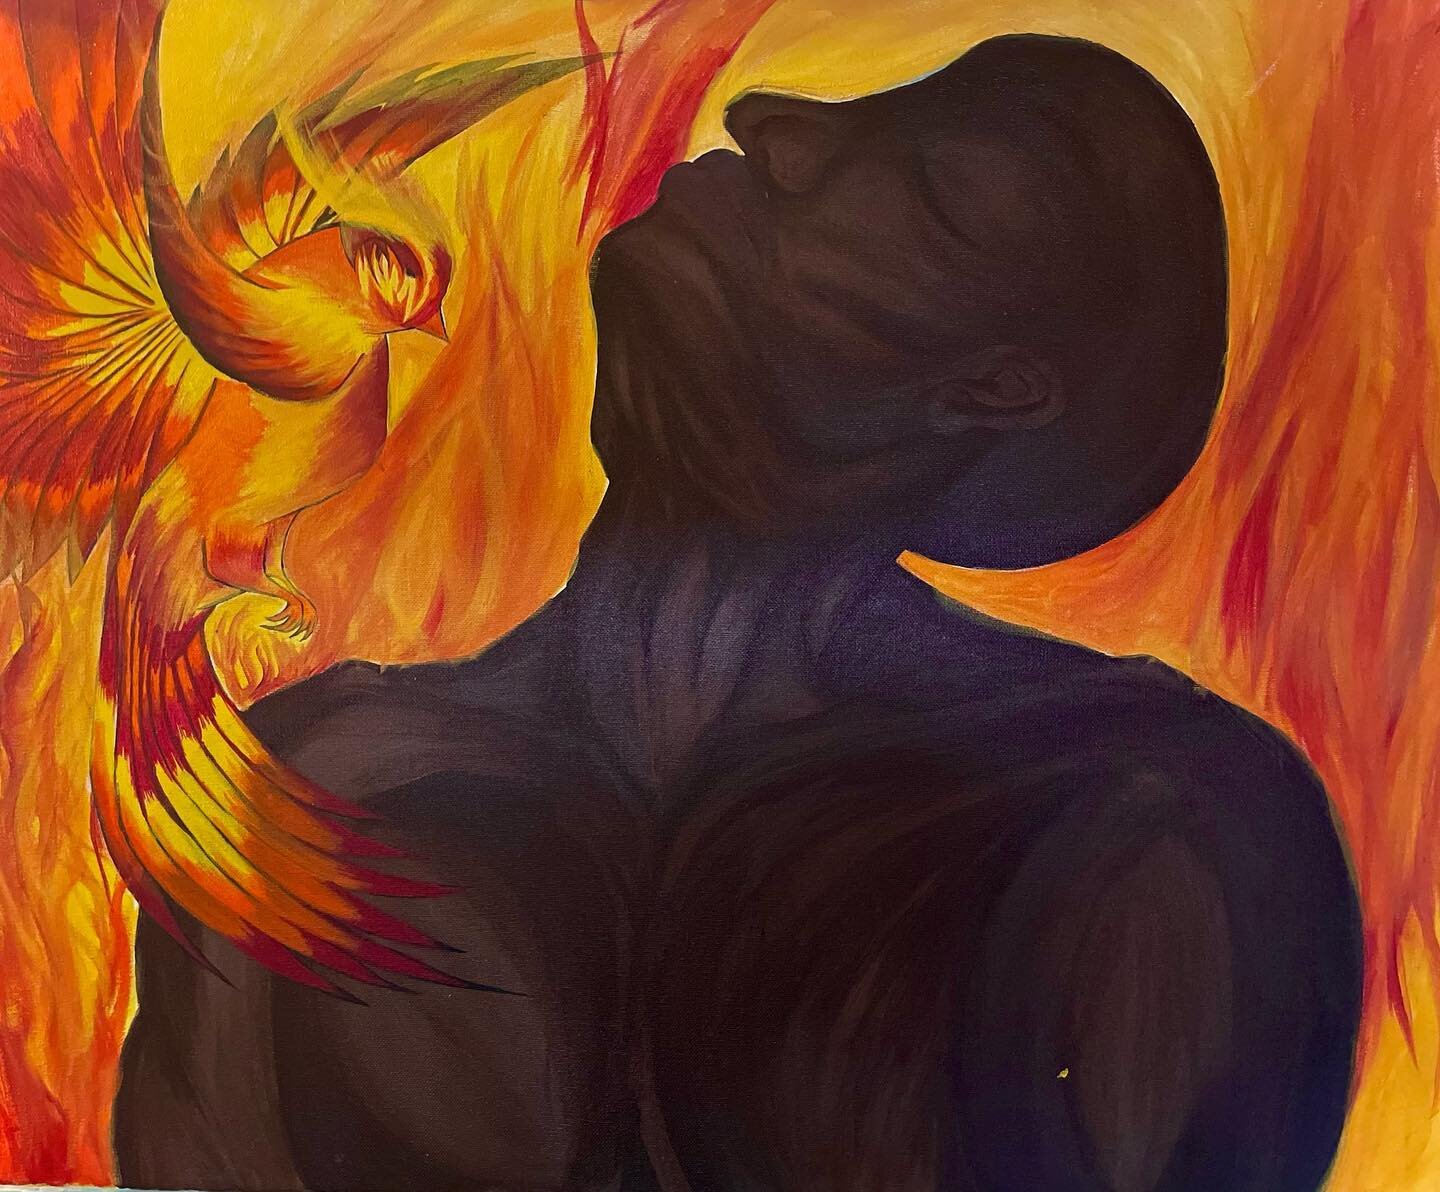 &ldquo;Still I Rise&rdquo;

This piece is about what&rsquo;s been going on in society, particularly to the black man. It&rsquo;s about how black men face many adversities and hardships. However through the ashes they are still able to rise and reinve